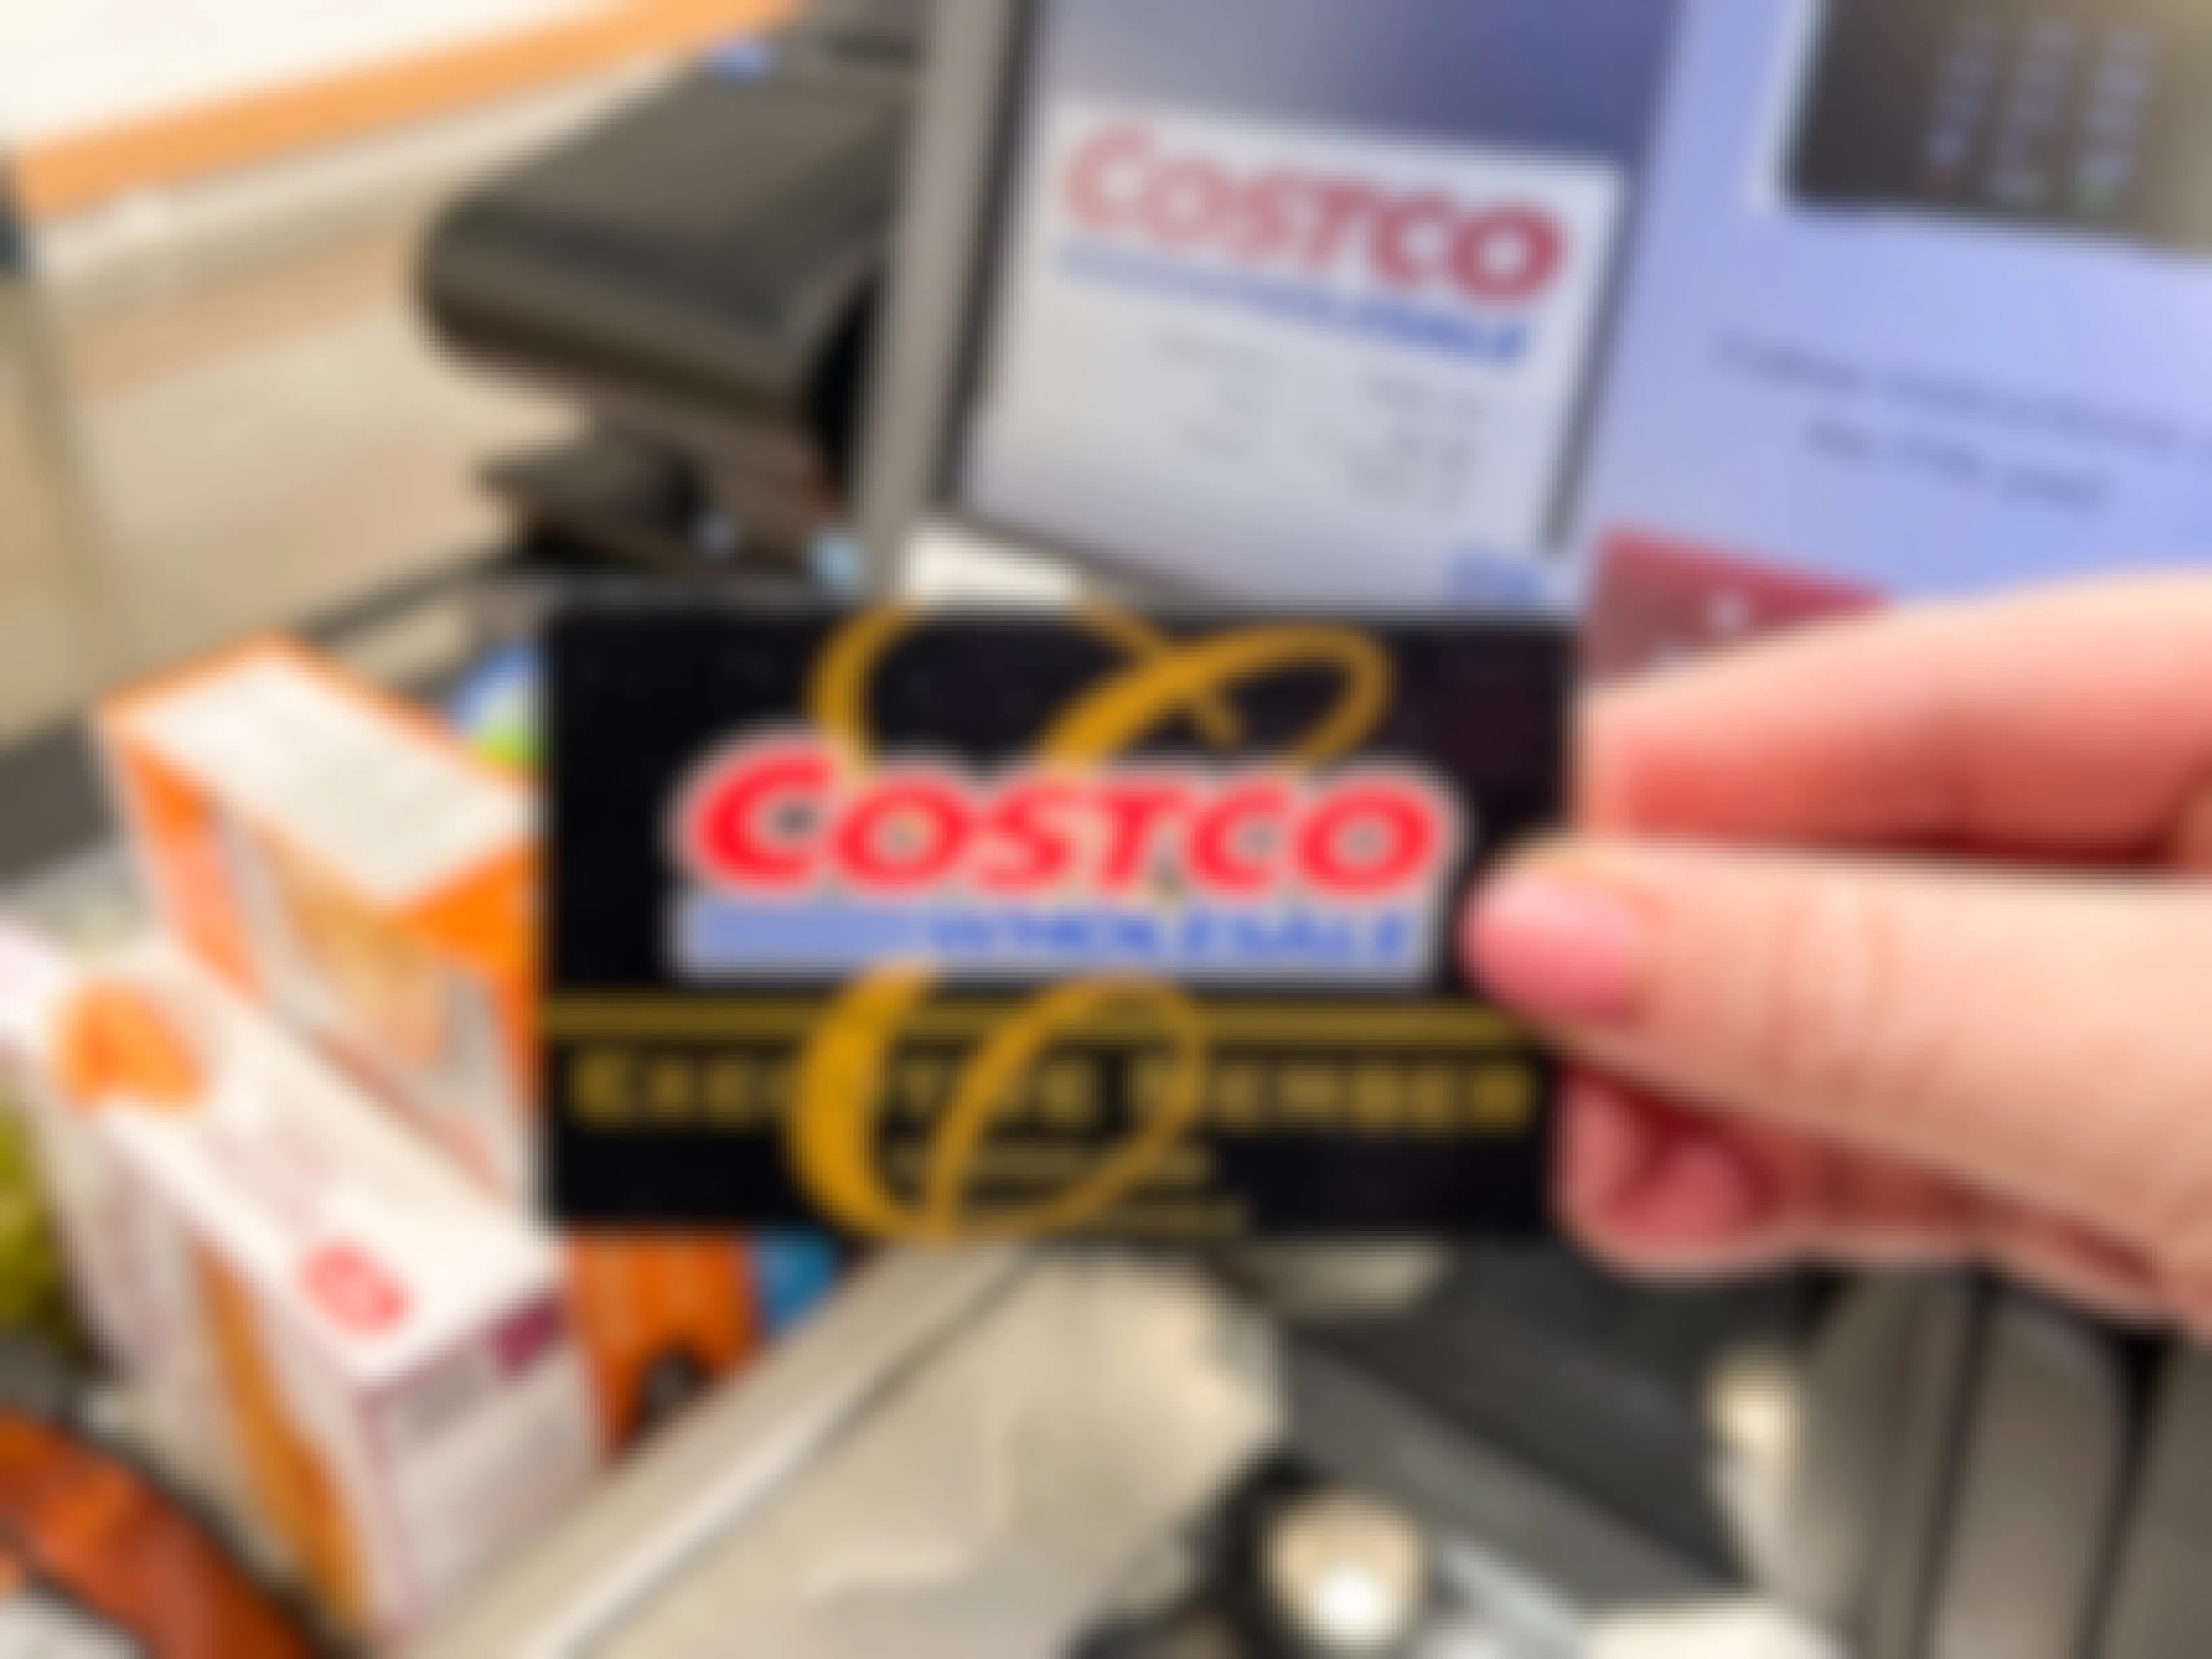 A person's hand holding up their Costco membership card in front of the self-checkout scanner at Costco.